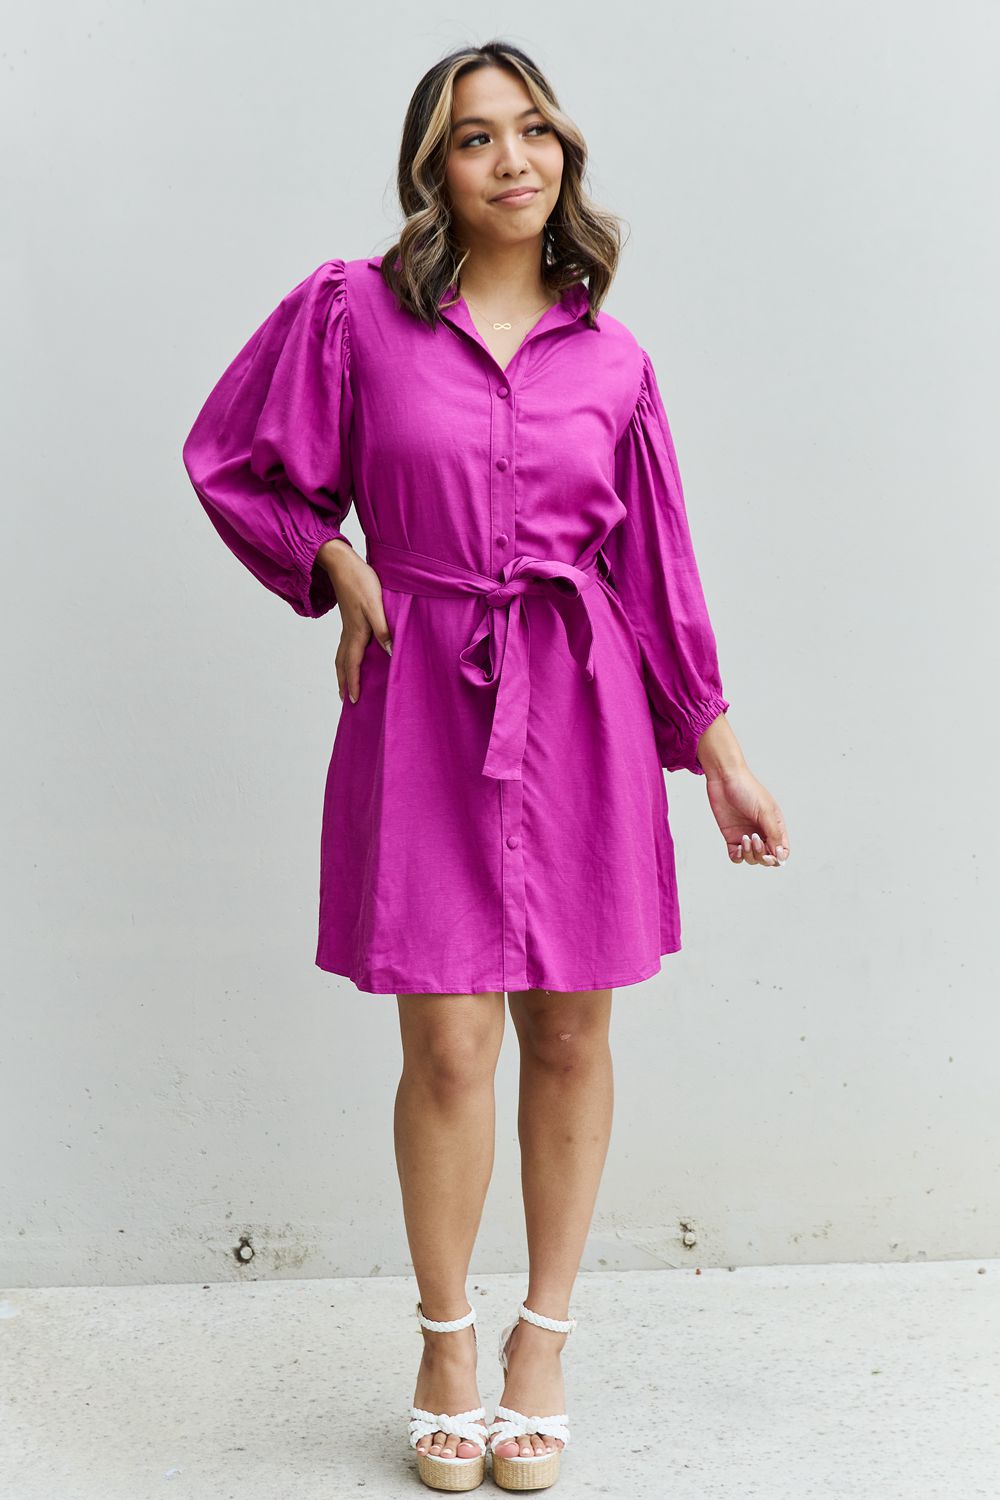 Hello Darling Full Size Half Sleeve Belted Mini Dress in Magenta - All Dresses - Dresses - 4 - 2024